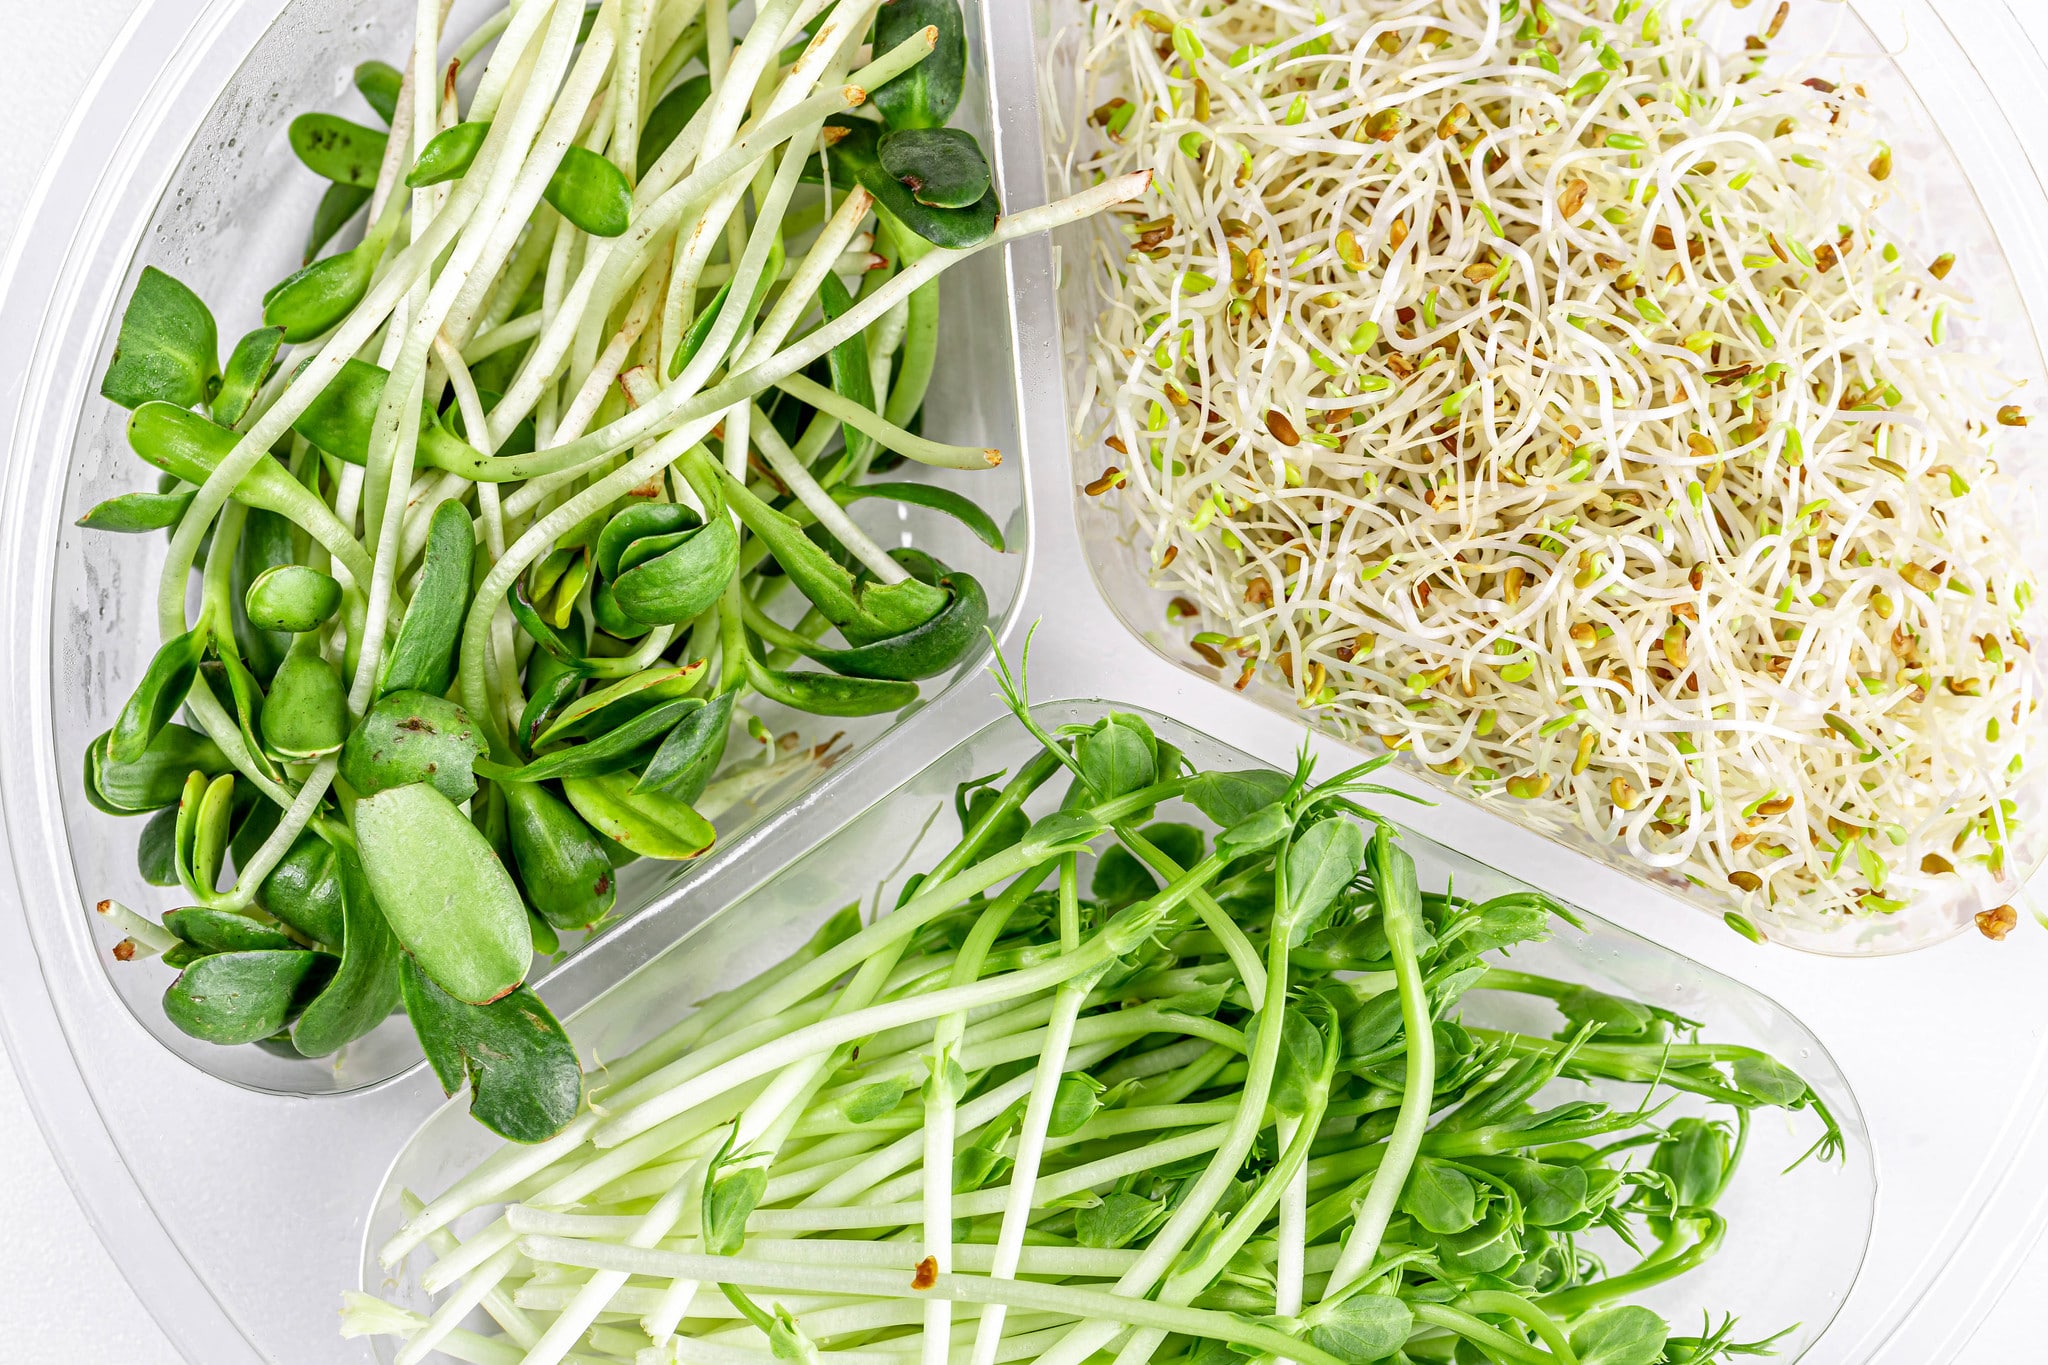 Microgreens are not the same as sprouts